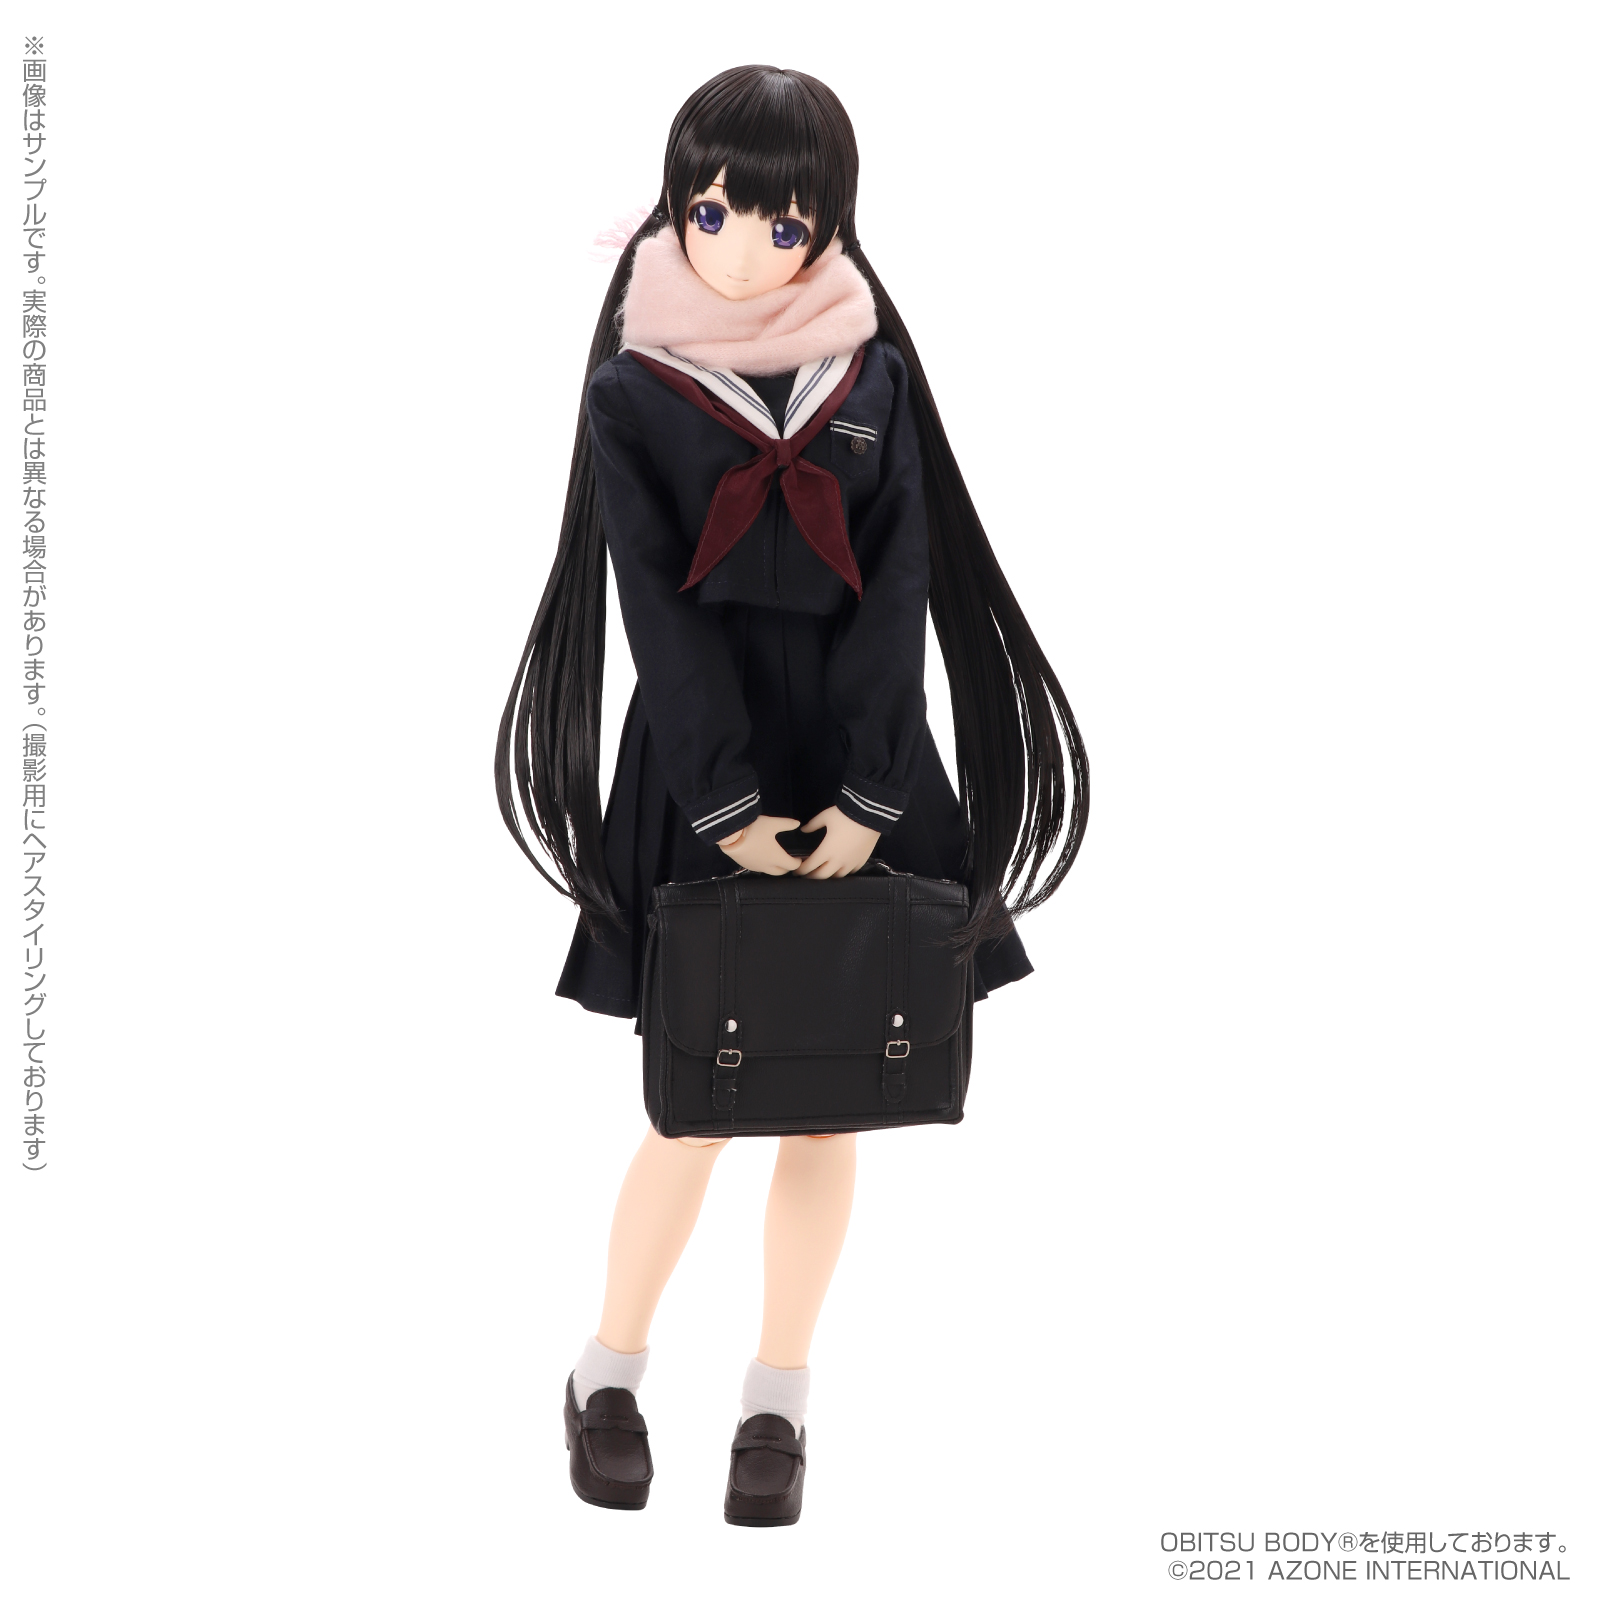 Happiness Clover 和遥キナ学校制服コレクション『和遥清心女子学園ver./まひろ』ハピネスクローバー 1/3 完成品ドール-001